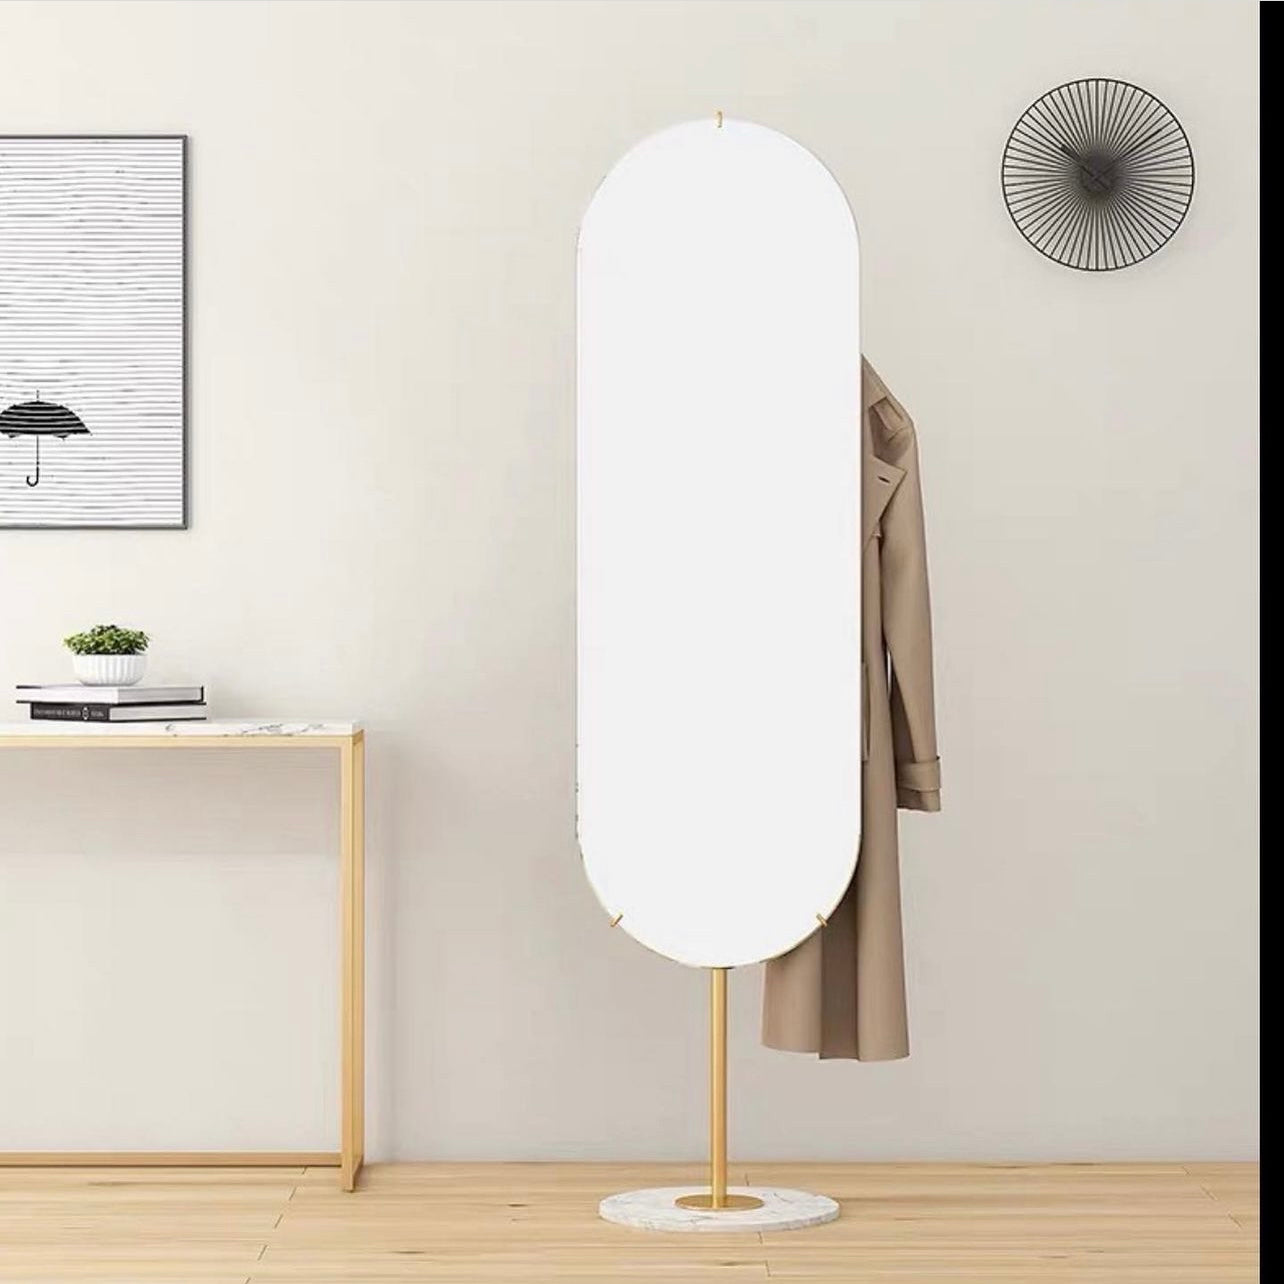 Hommie Clothes Rack with Mirror HBWR004